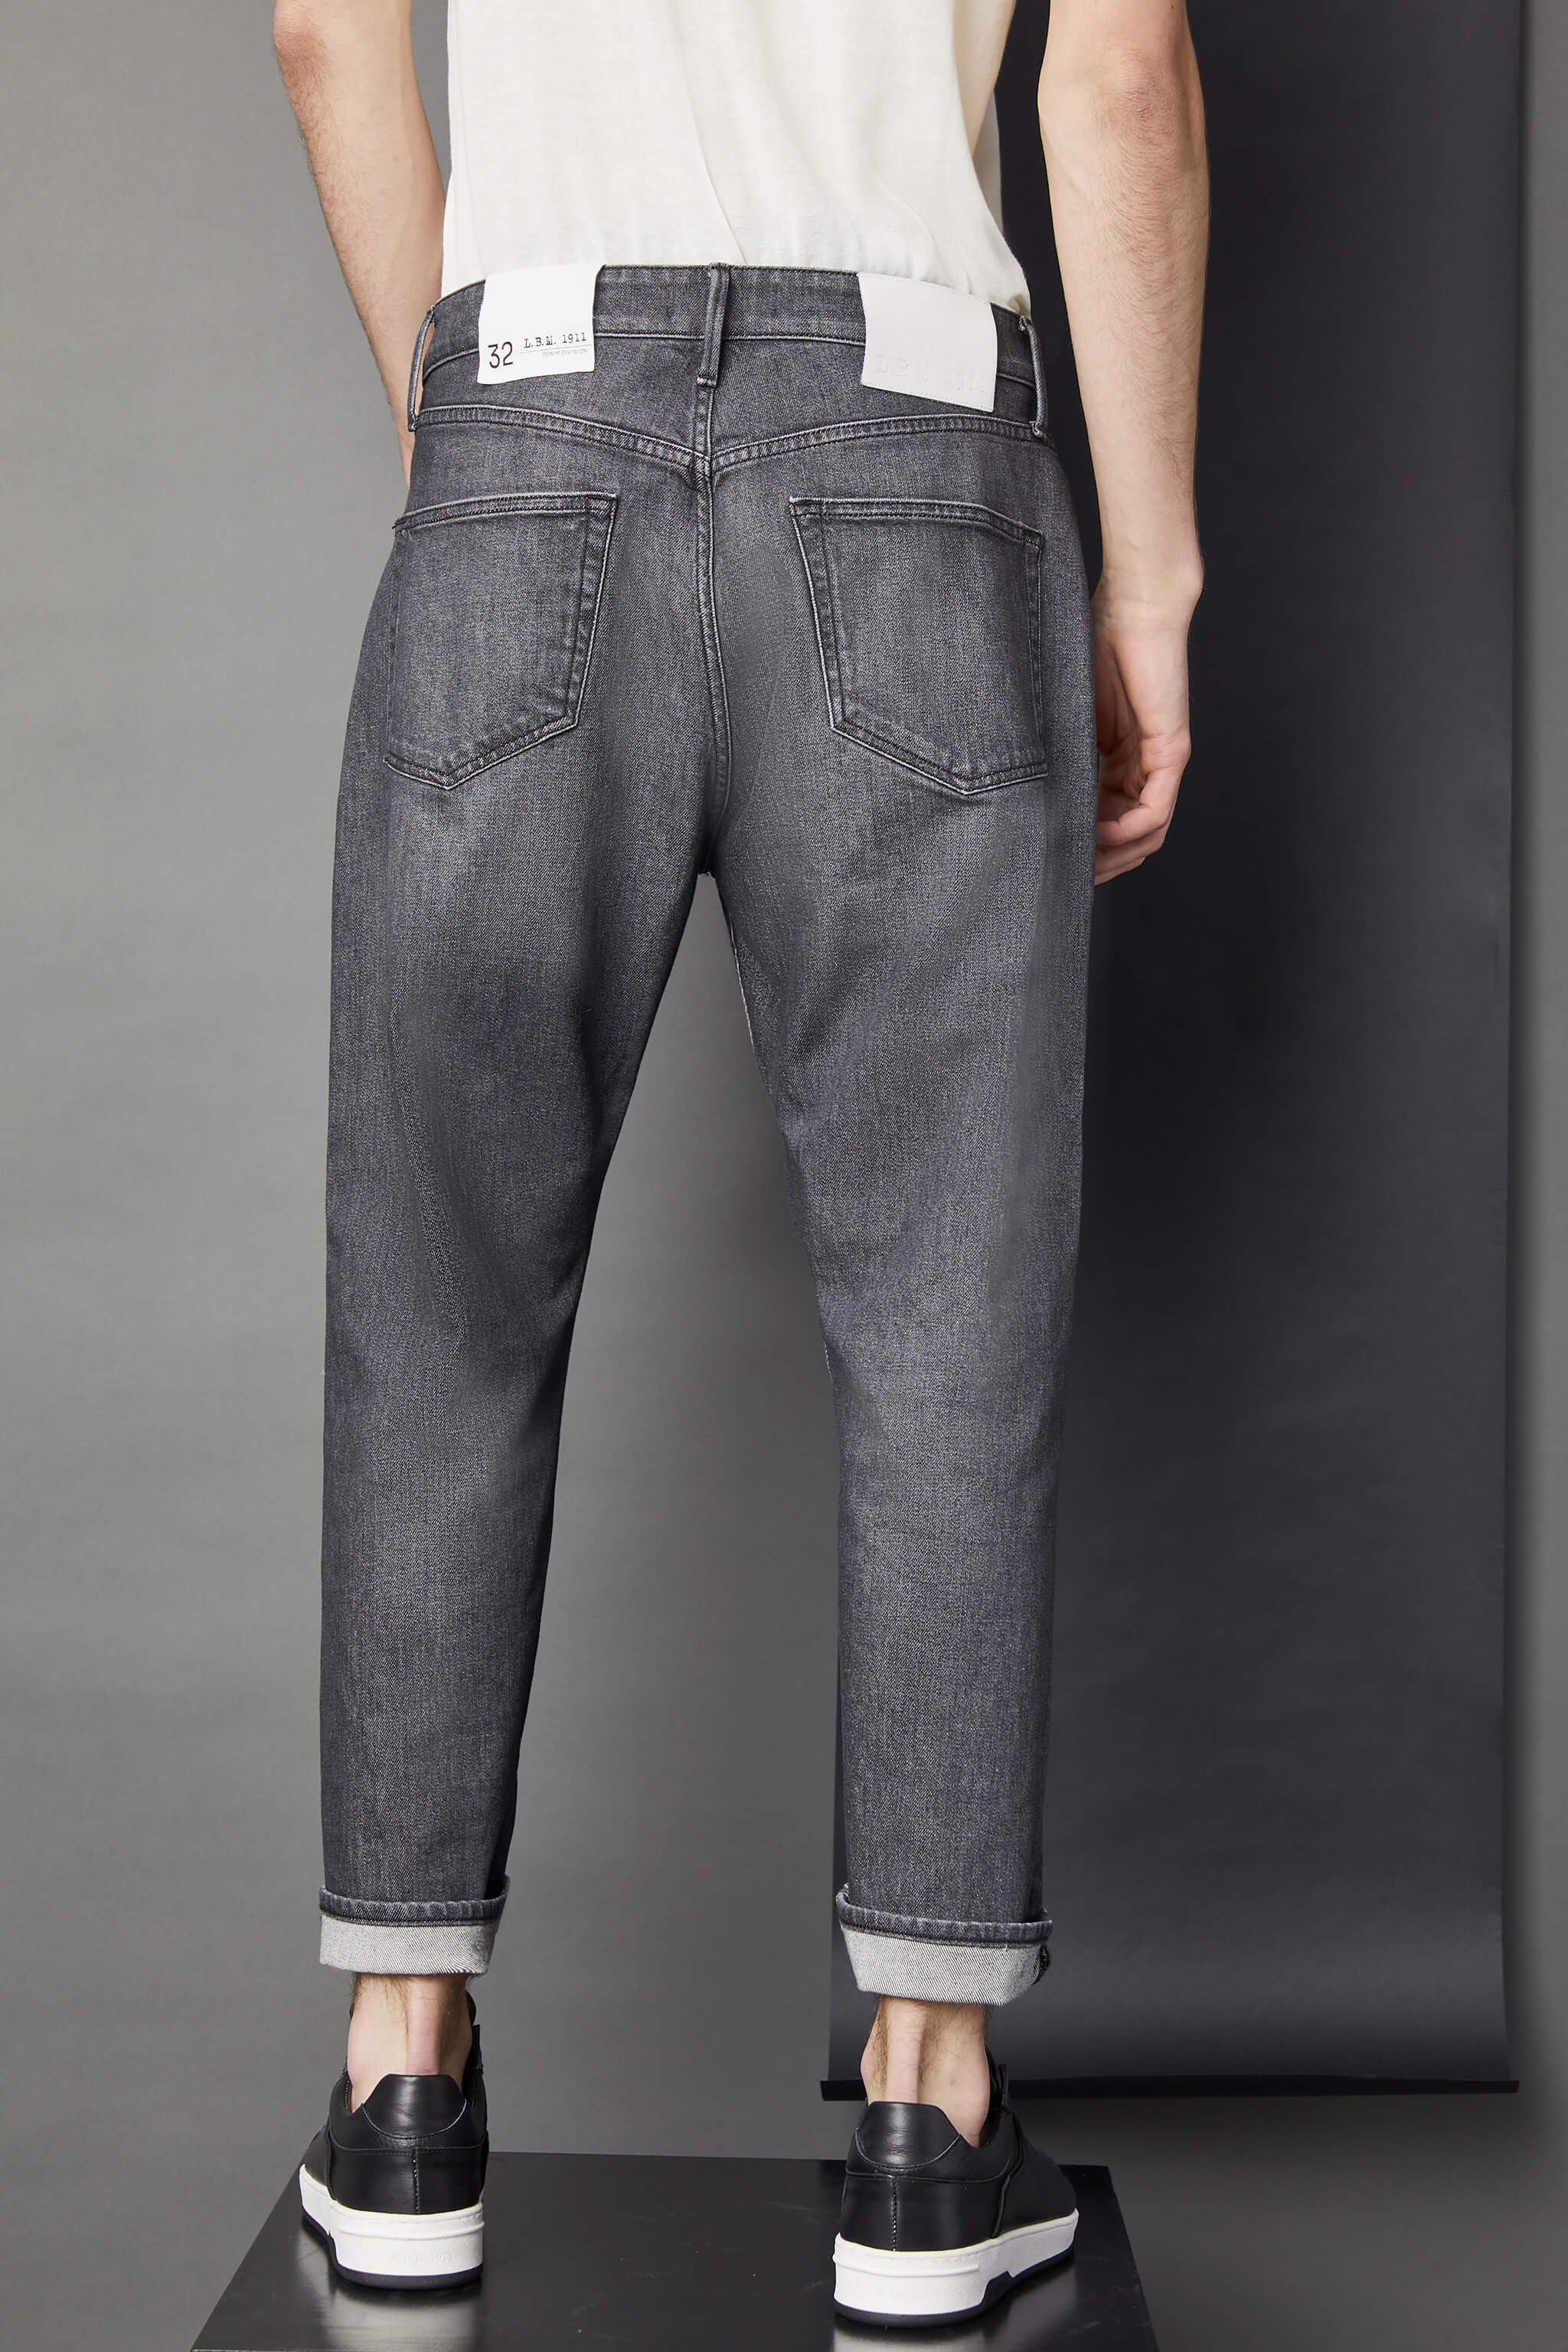 5 Pocket baggy jeans in Gray